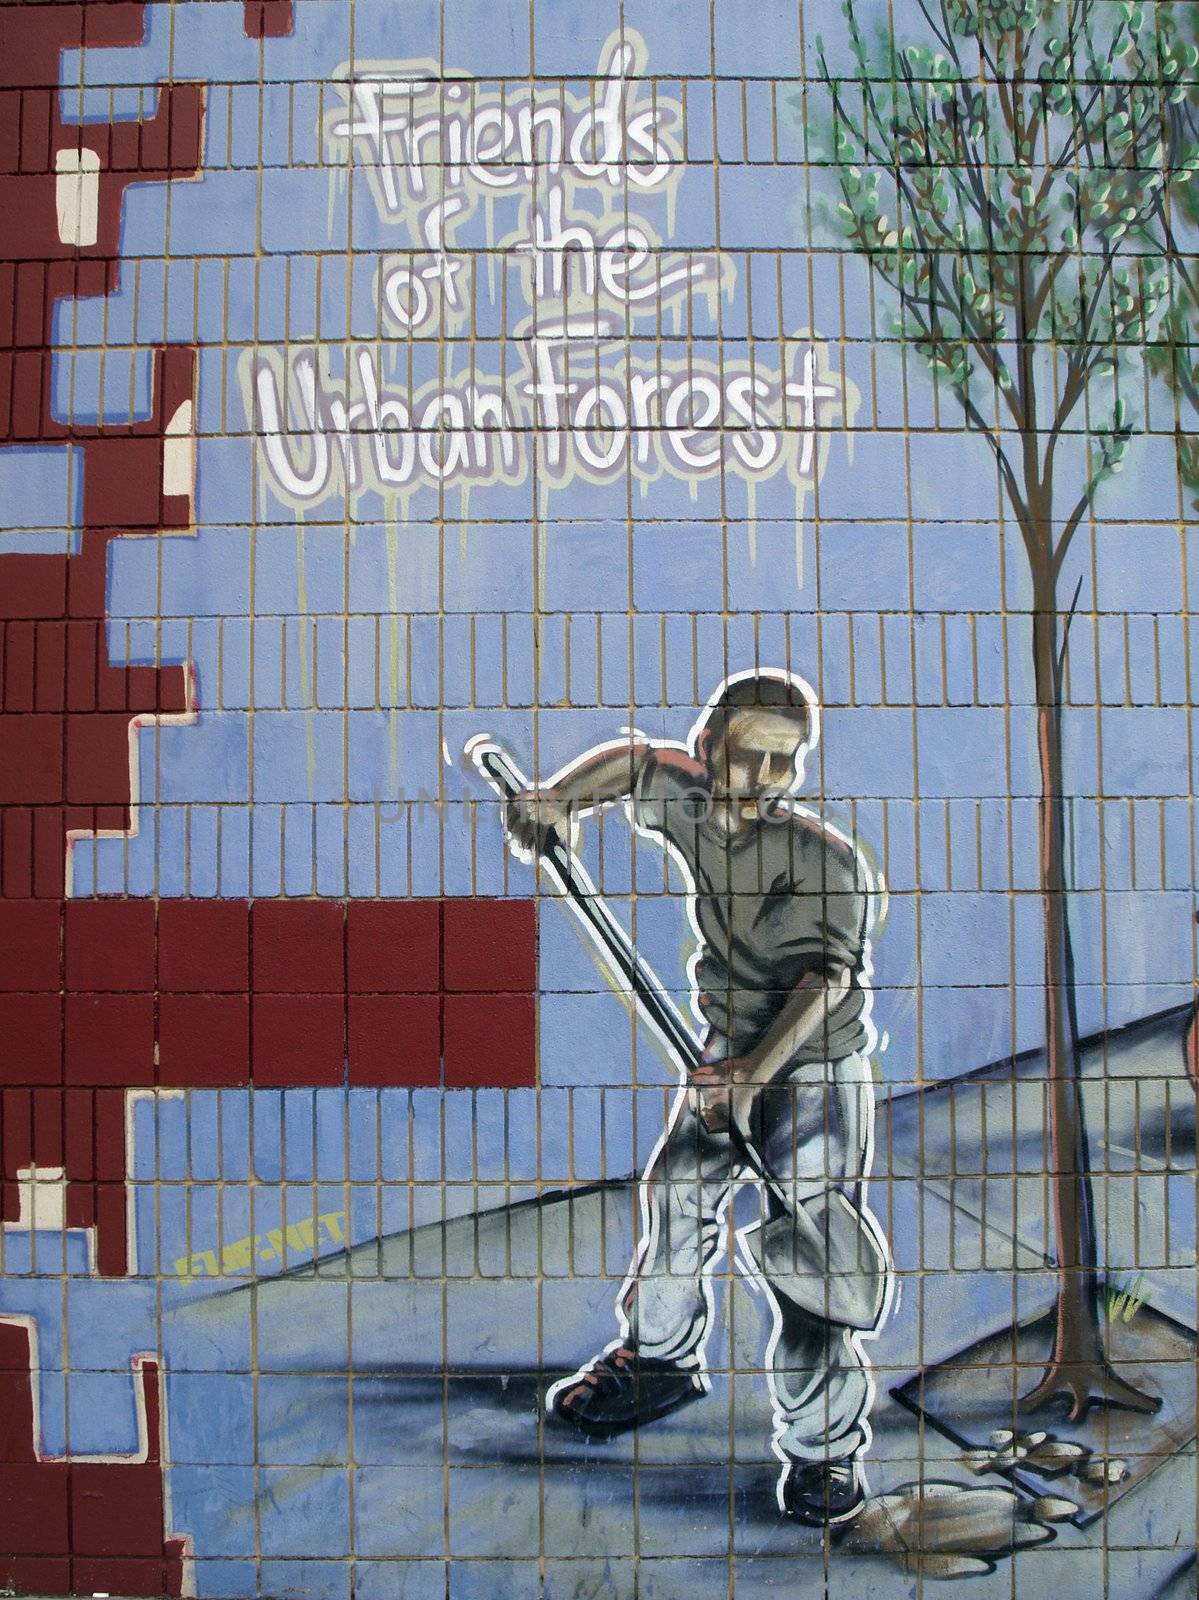 "Friends of the urban forrest" text on a graffiti by anderm